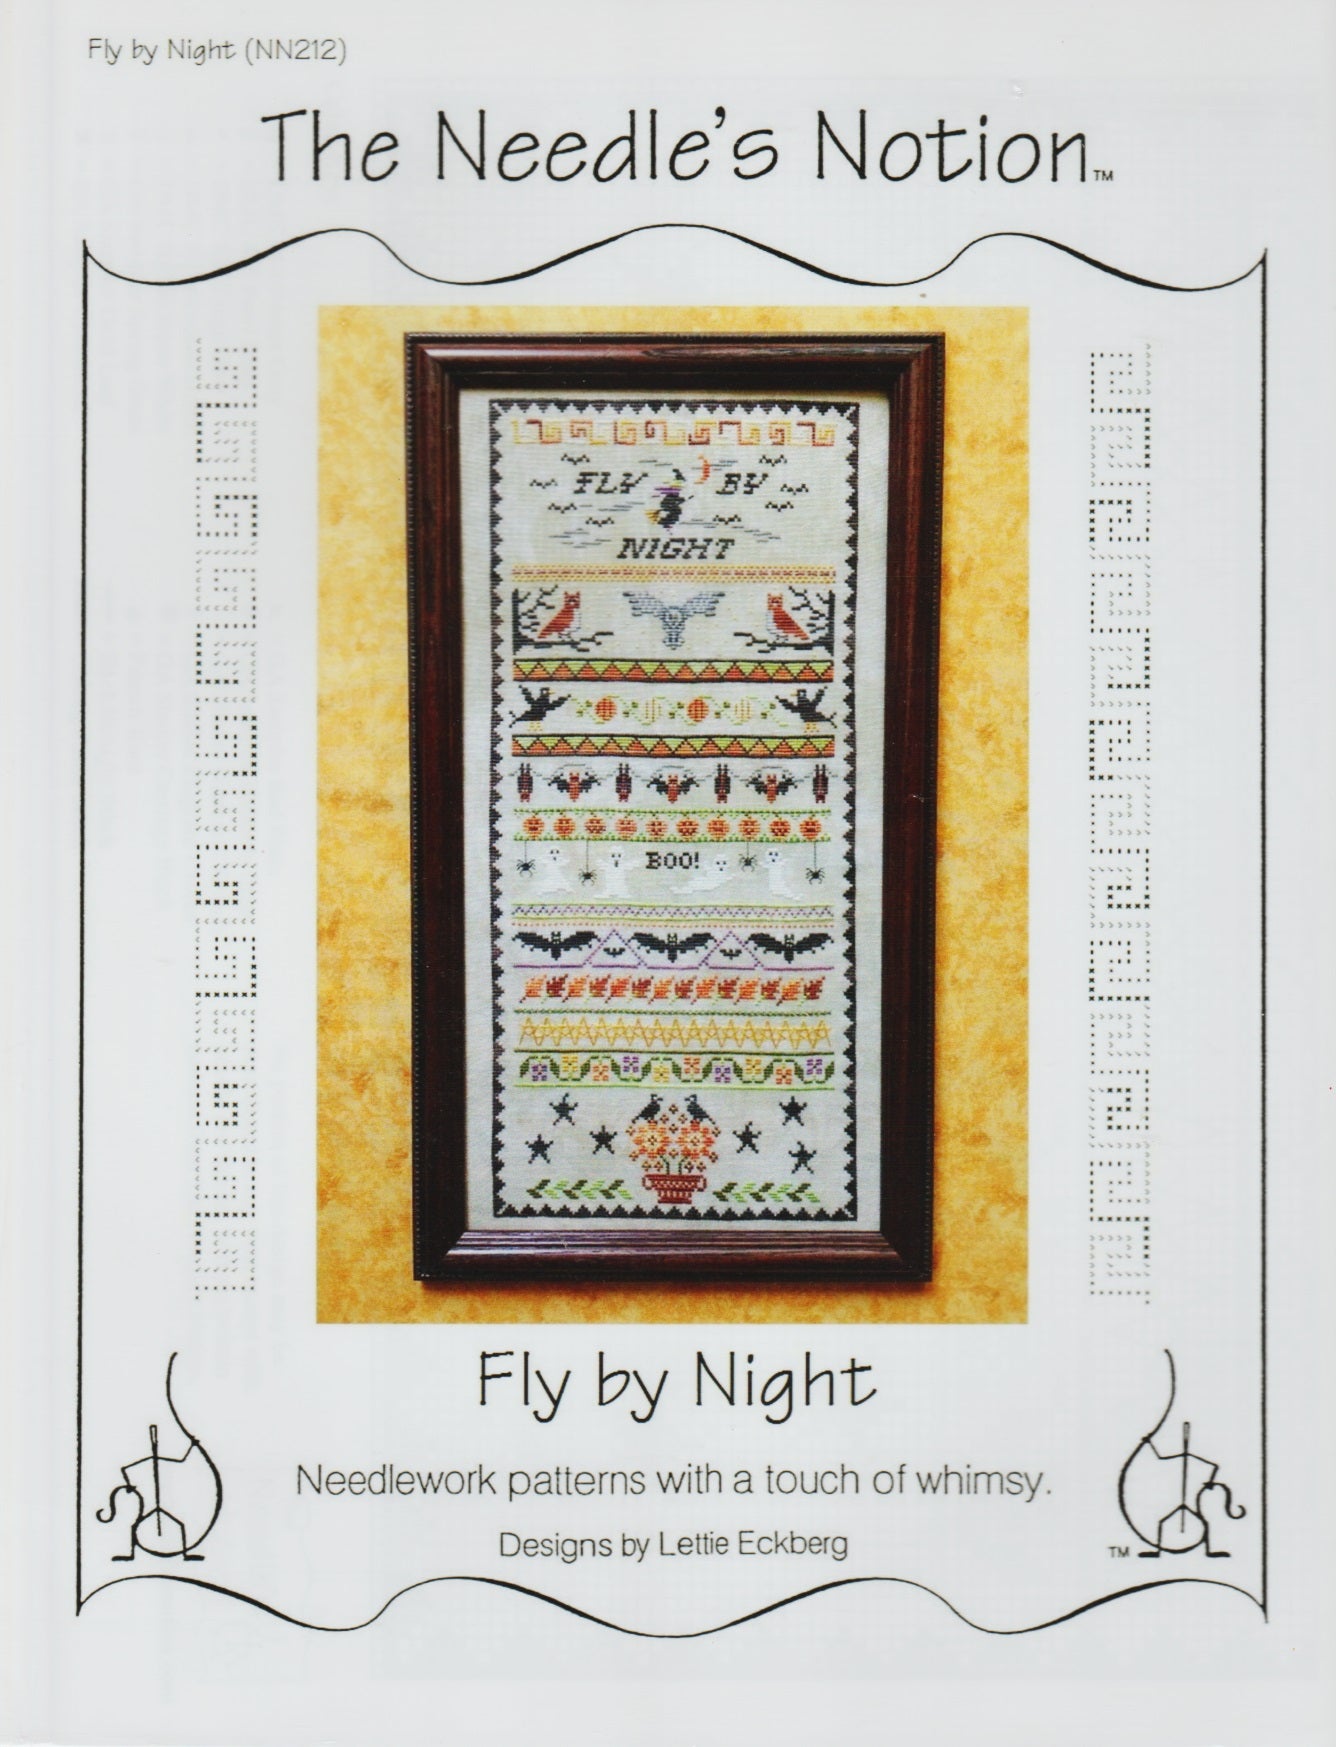 The Needle's Notion Fly By Night NN212 halloween cross stitch pattern